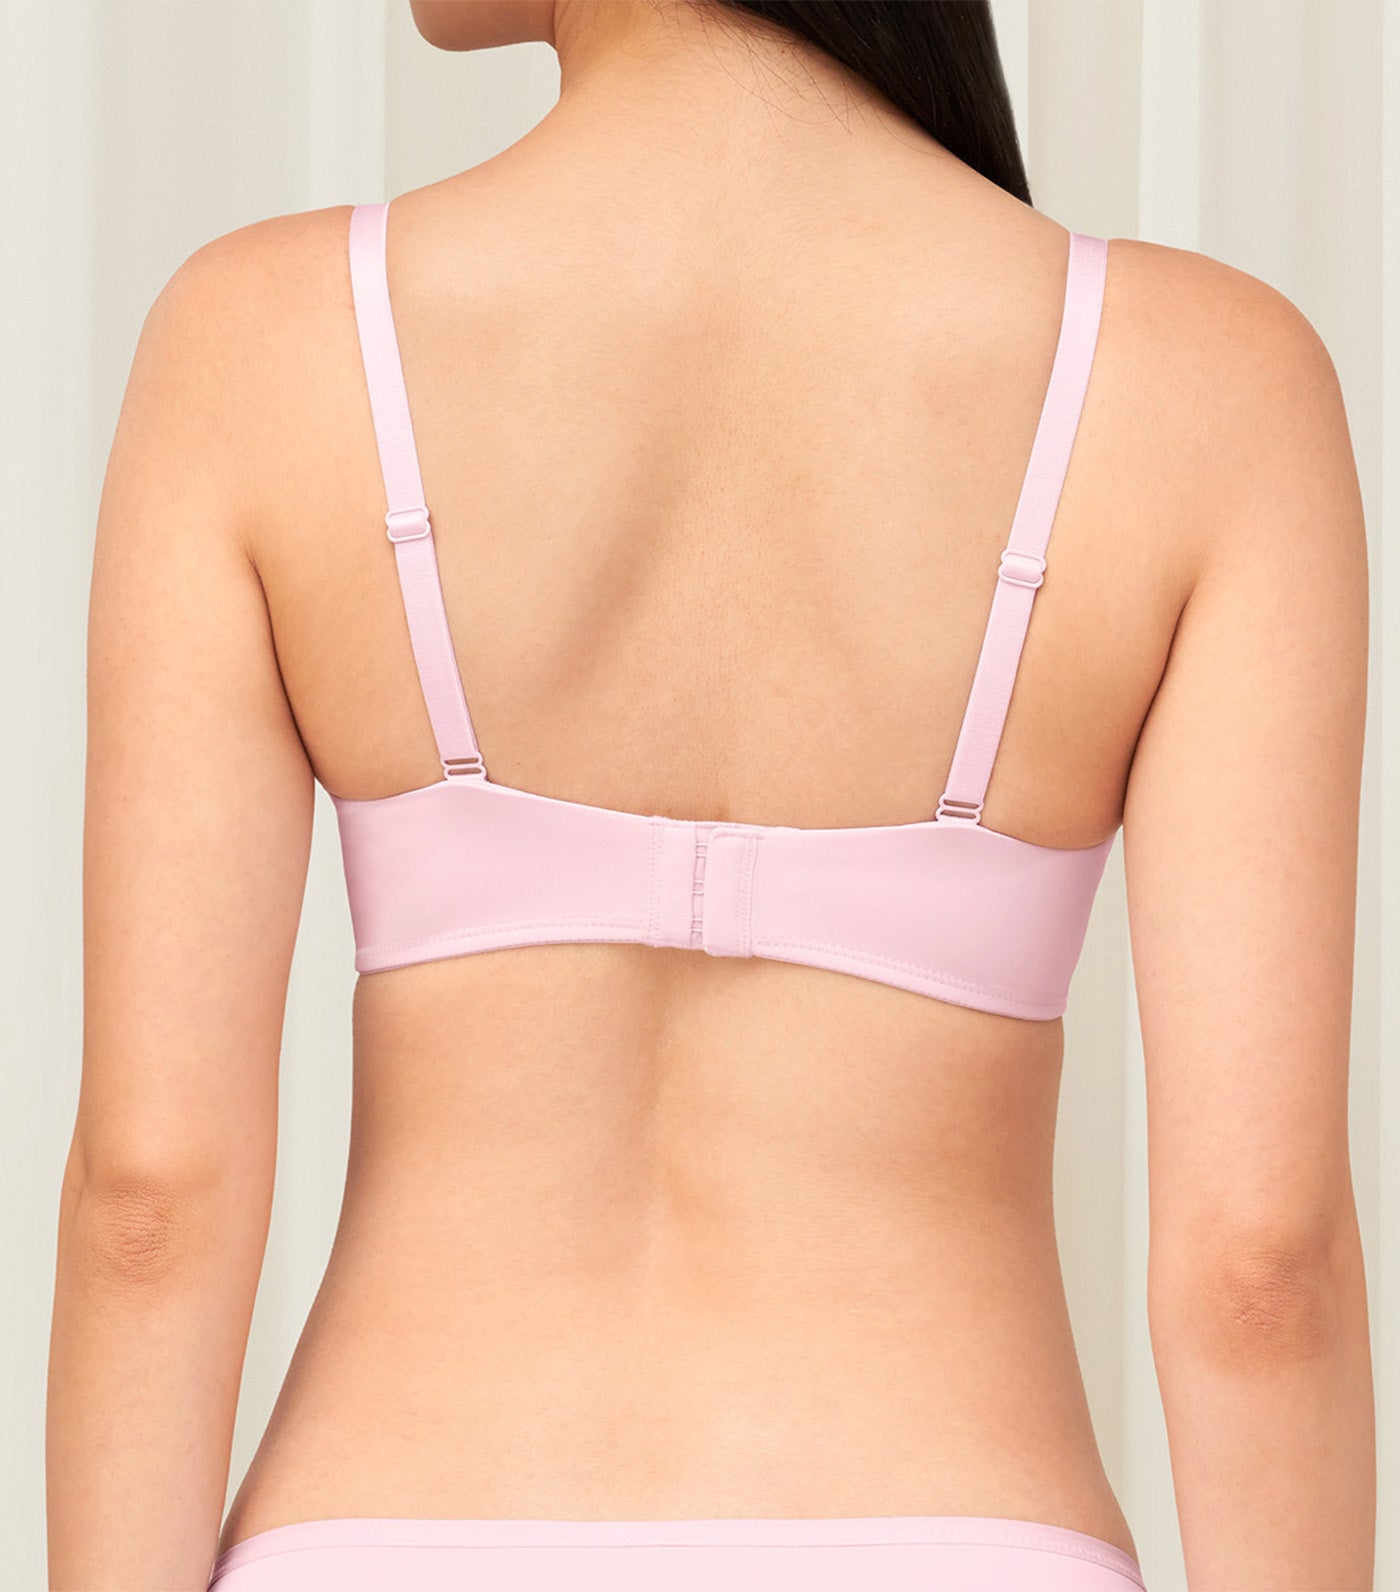 Everyday Natural LatexP Non-Wired Padded Bra Lavander